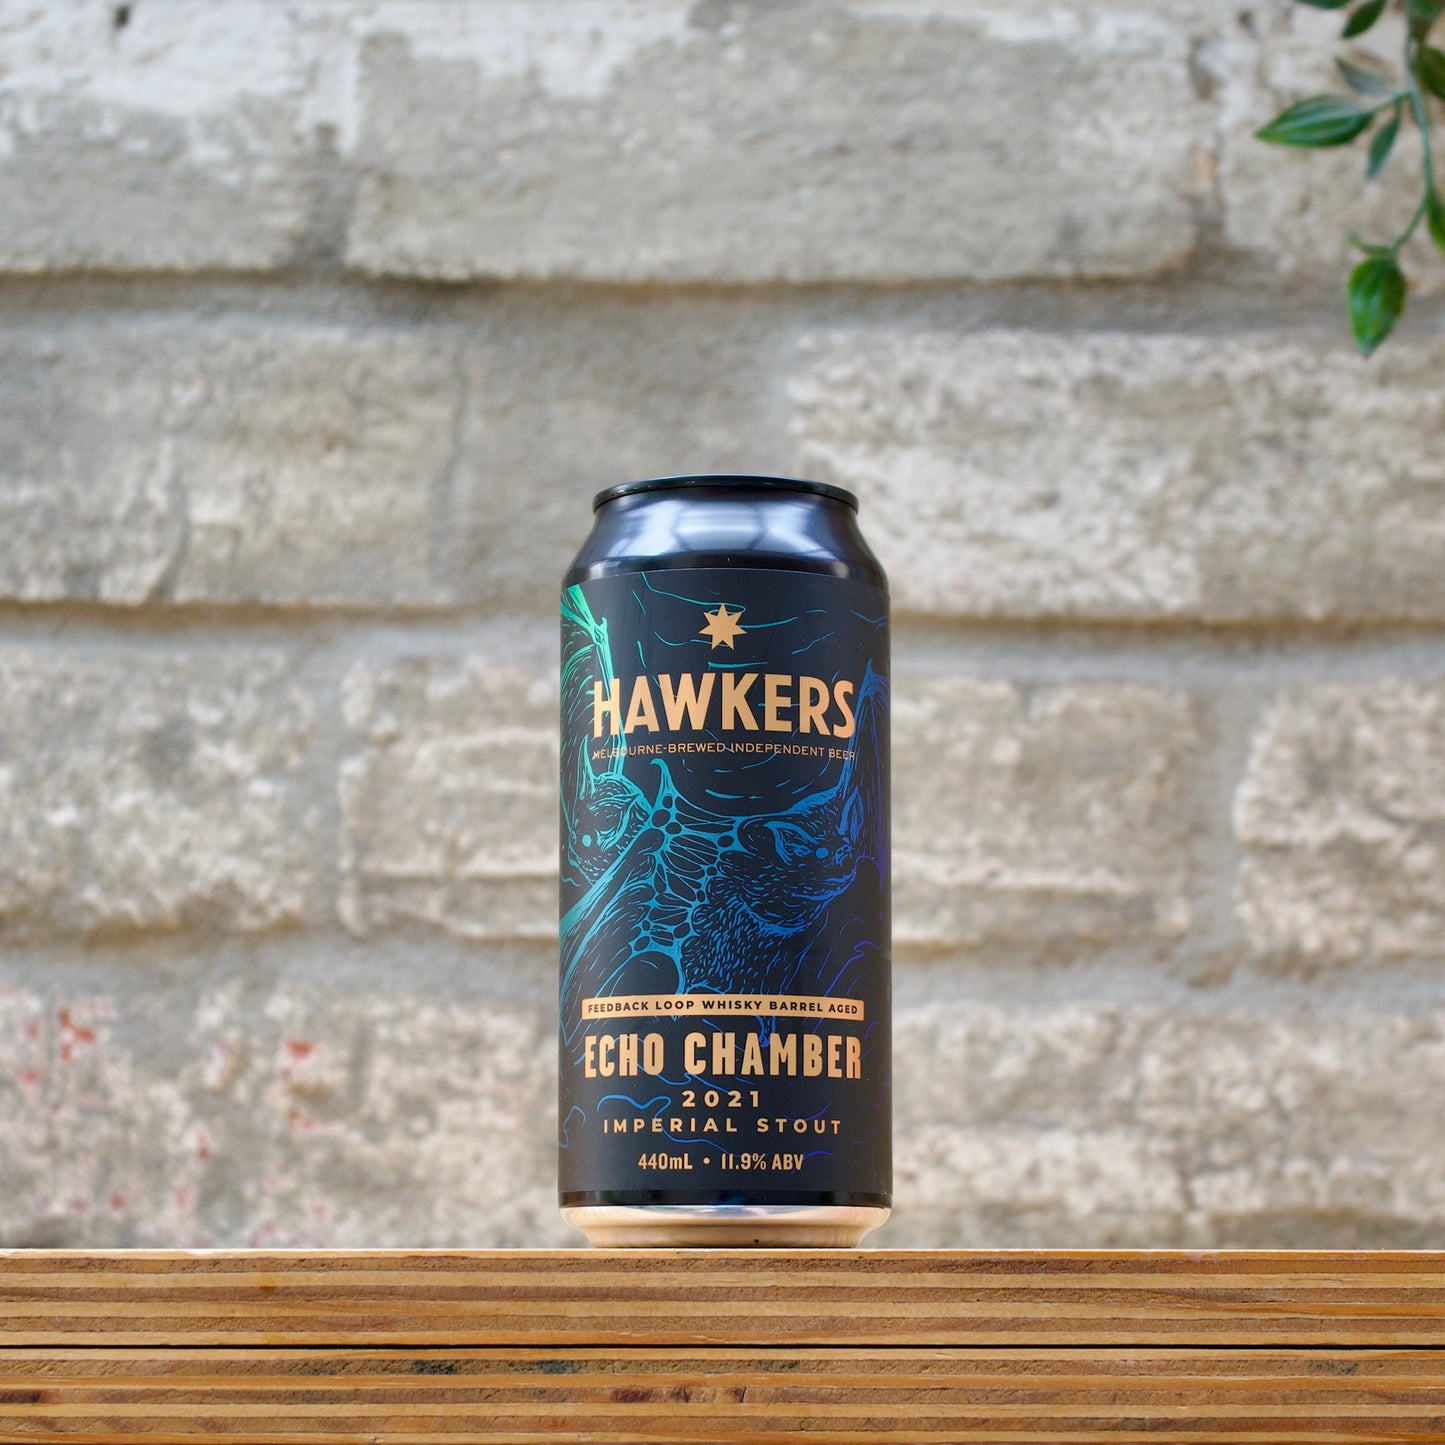 Hawkers Echo Chamber 2021 Imperial Stout (440ml)